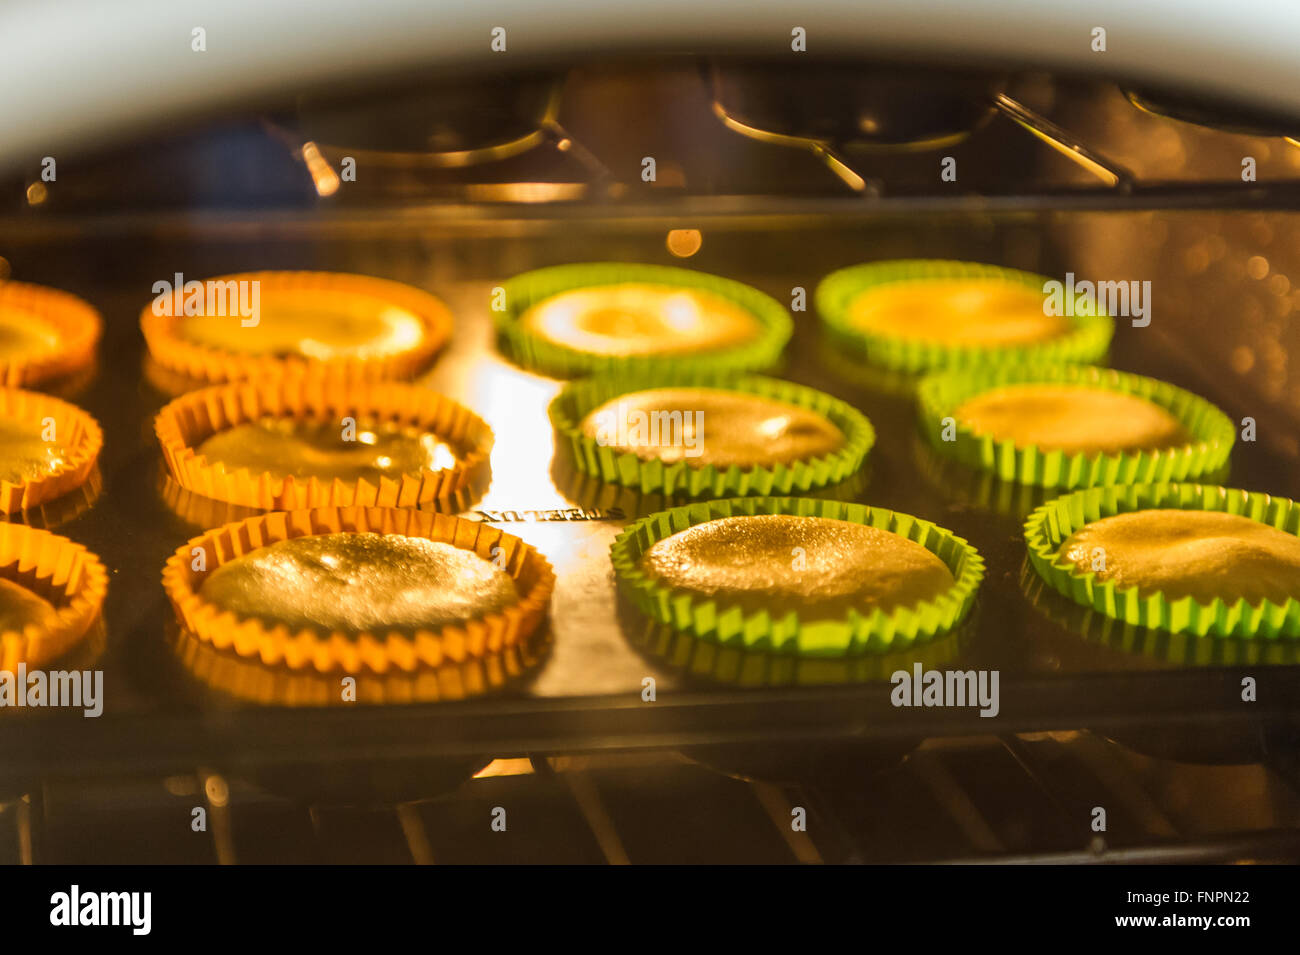 Cup cakes on a baking tray rise in the oven in a home kitchen. Stock Photo